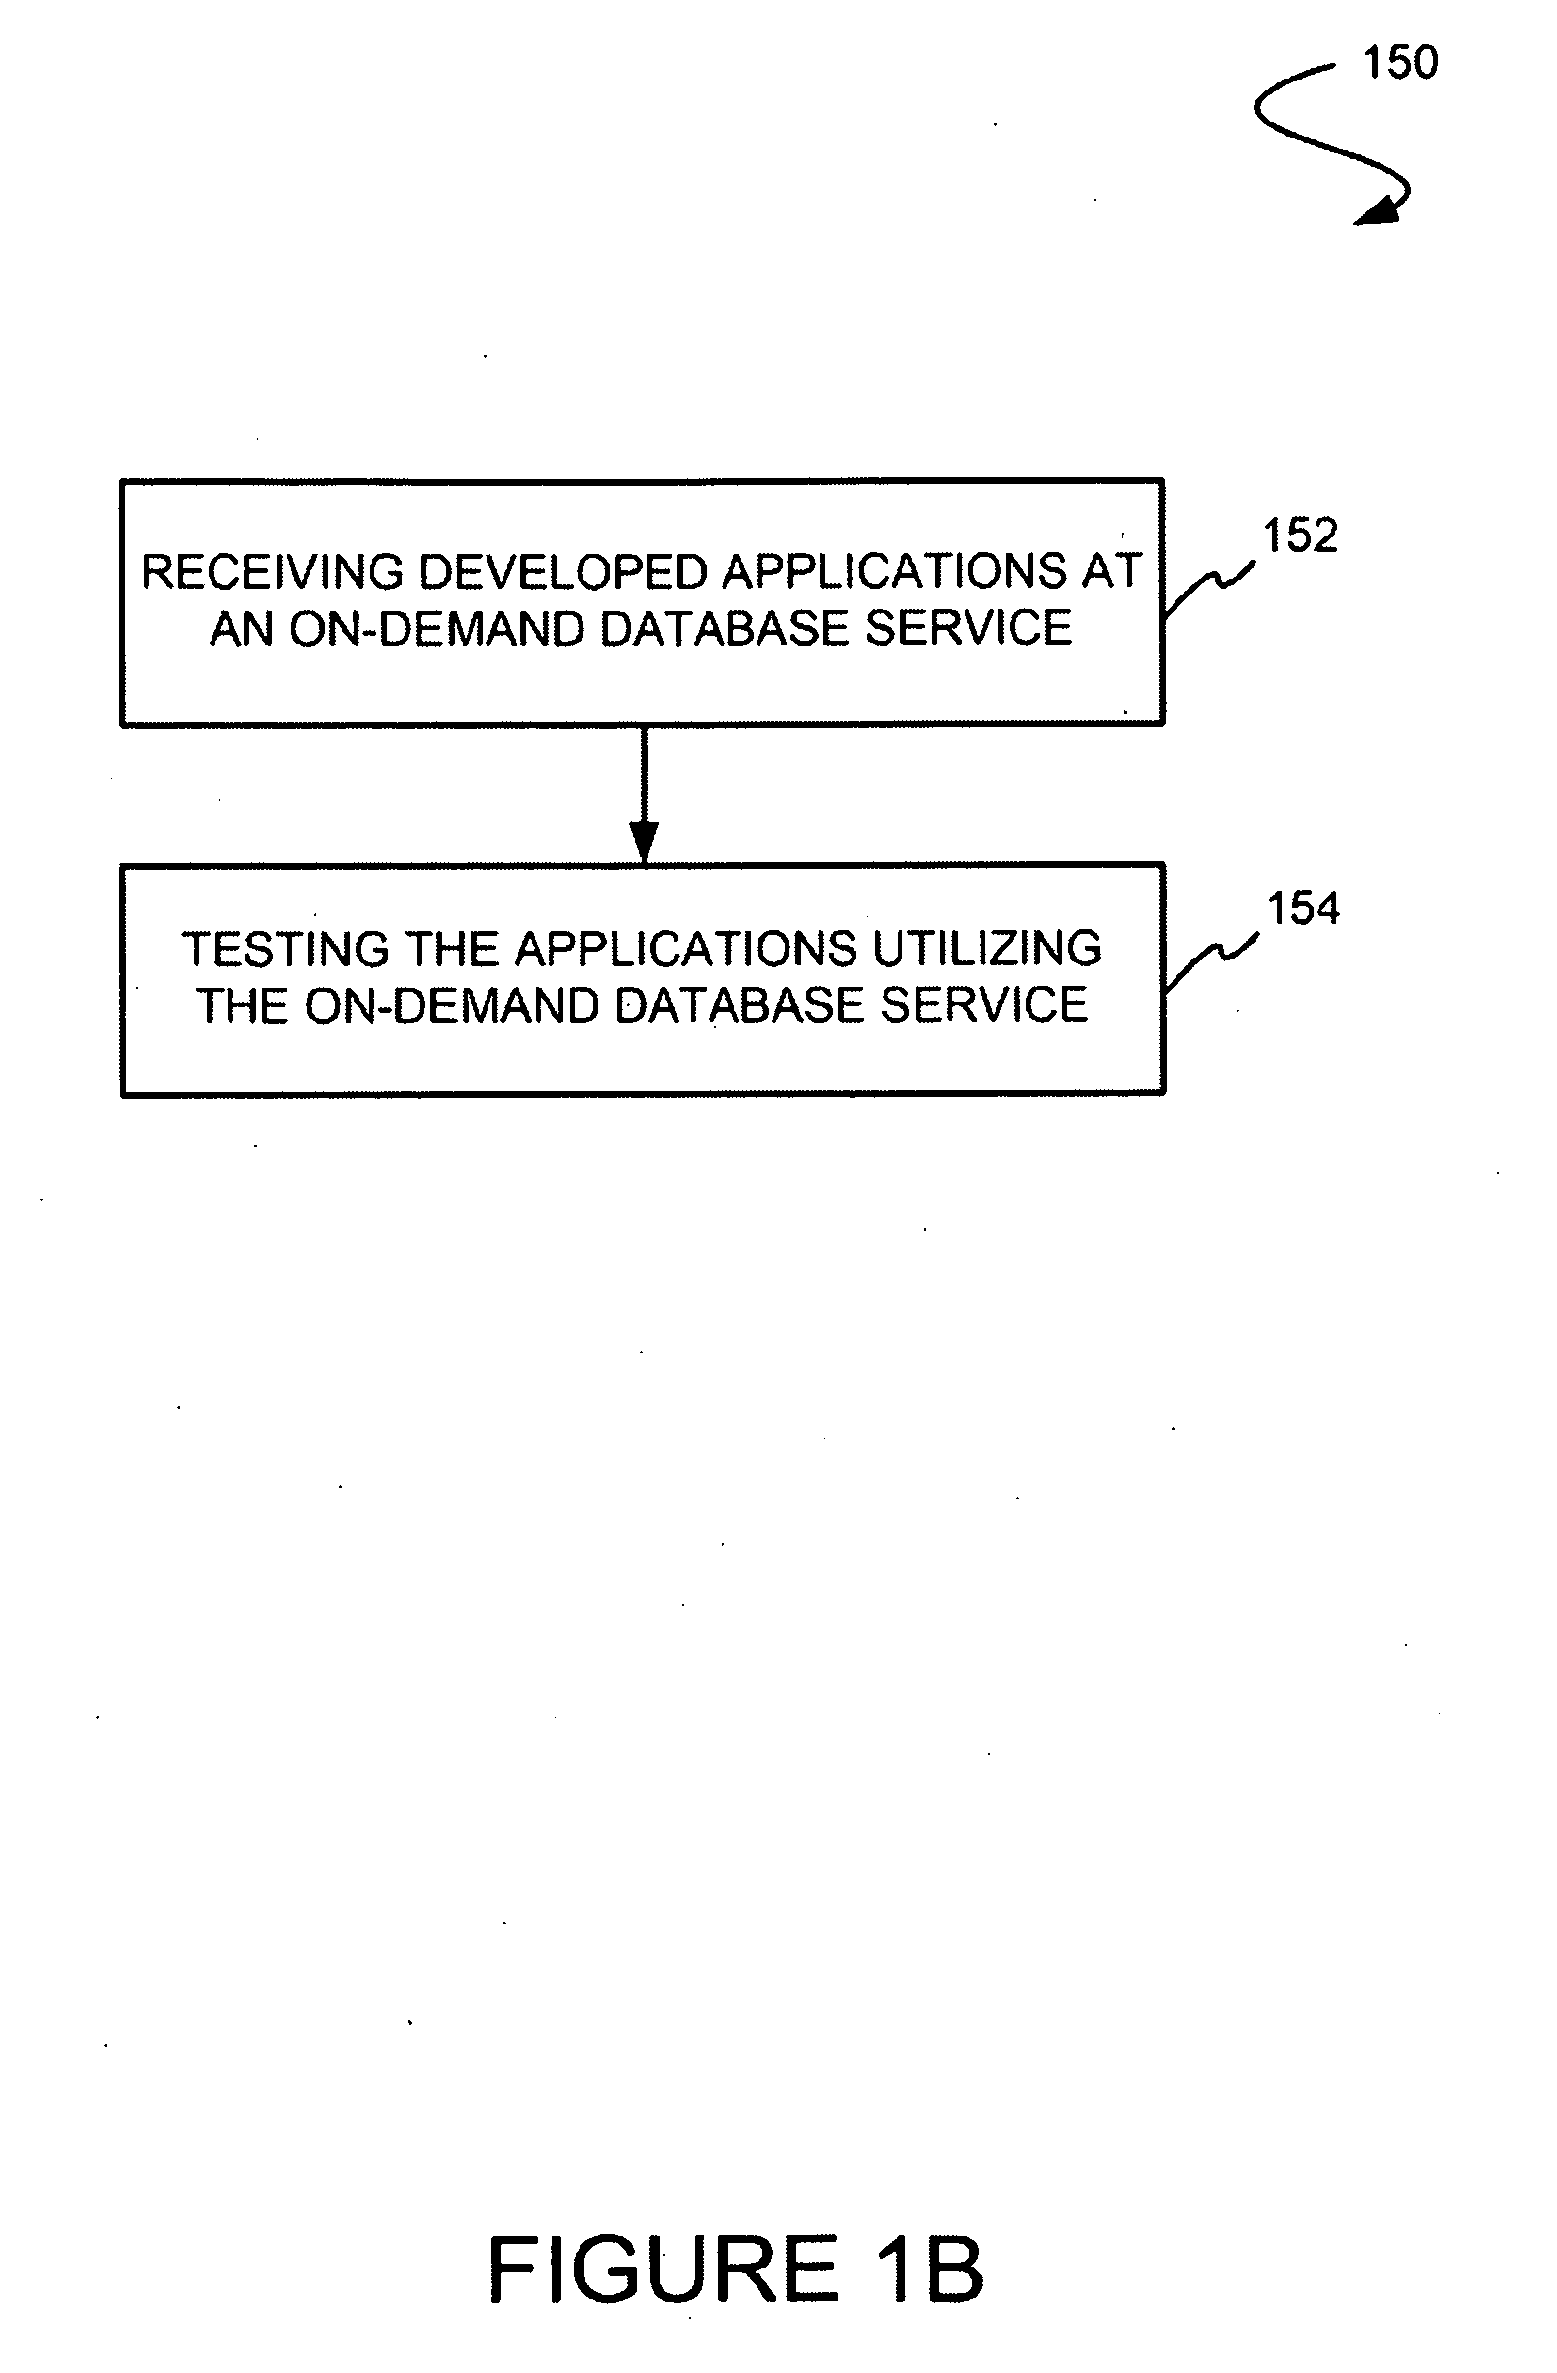 Method and system for allowing access to developed applications via a multi-tenant on-demand database service